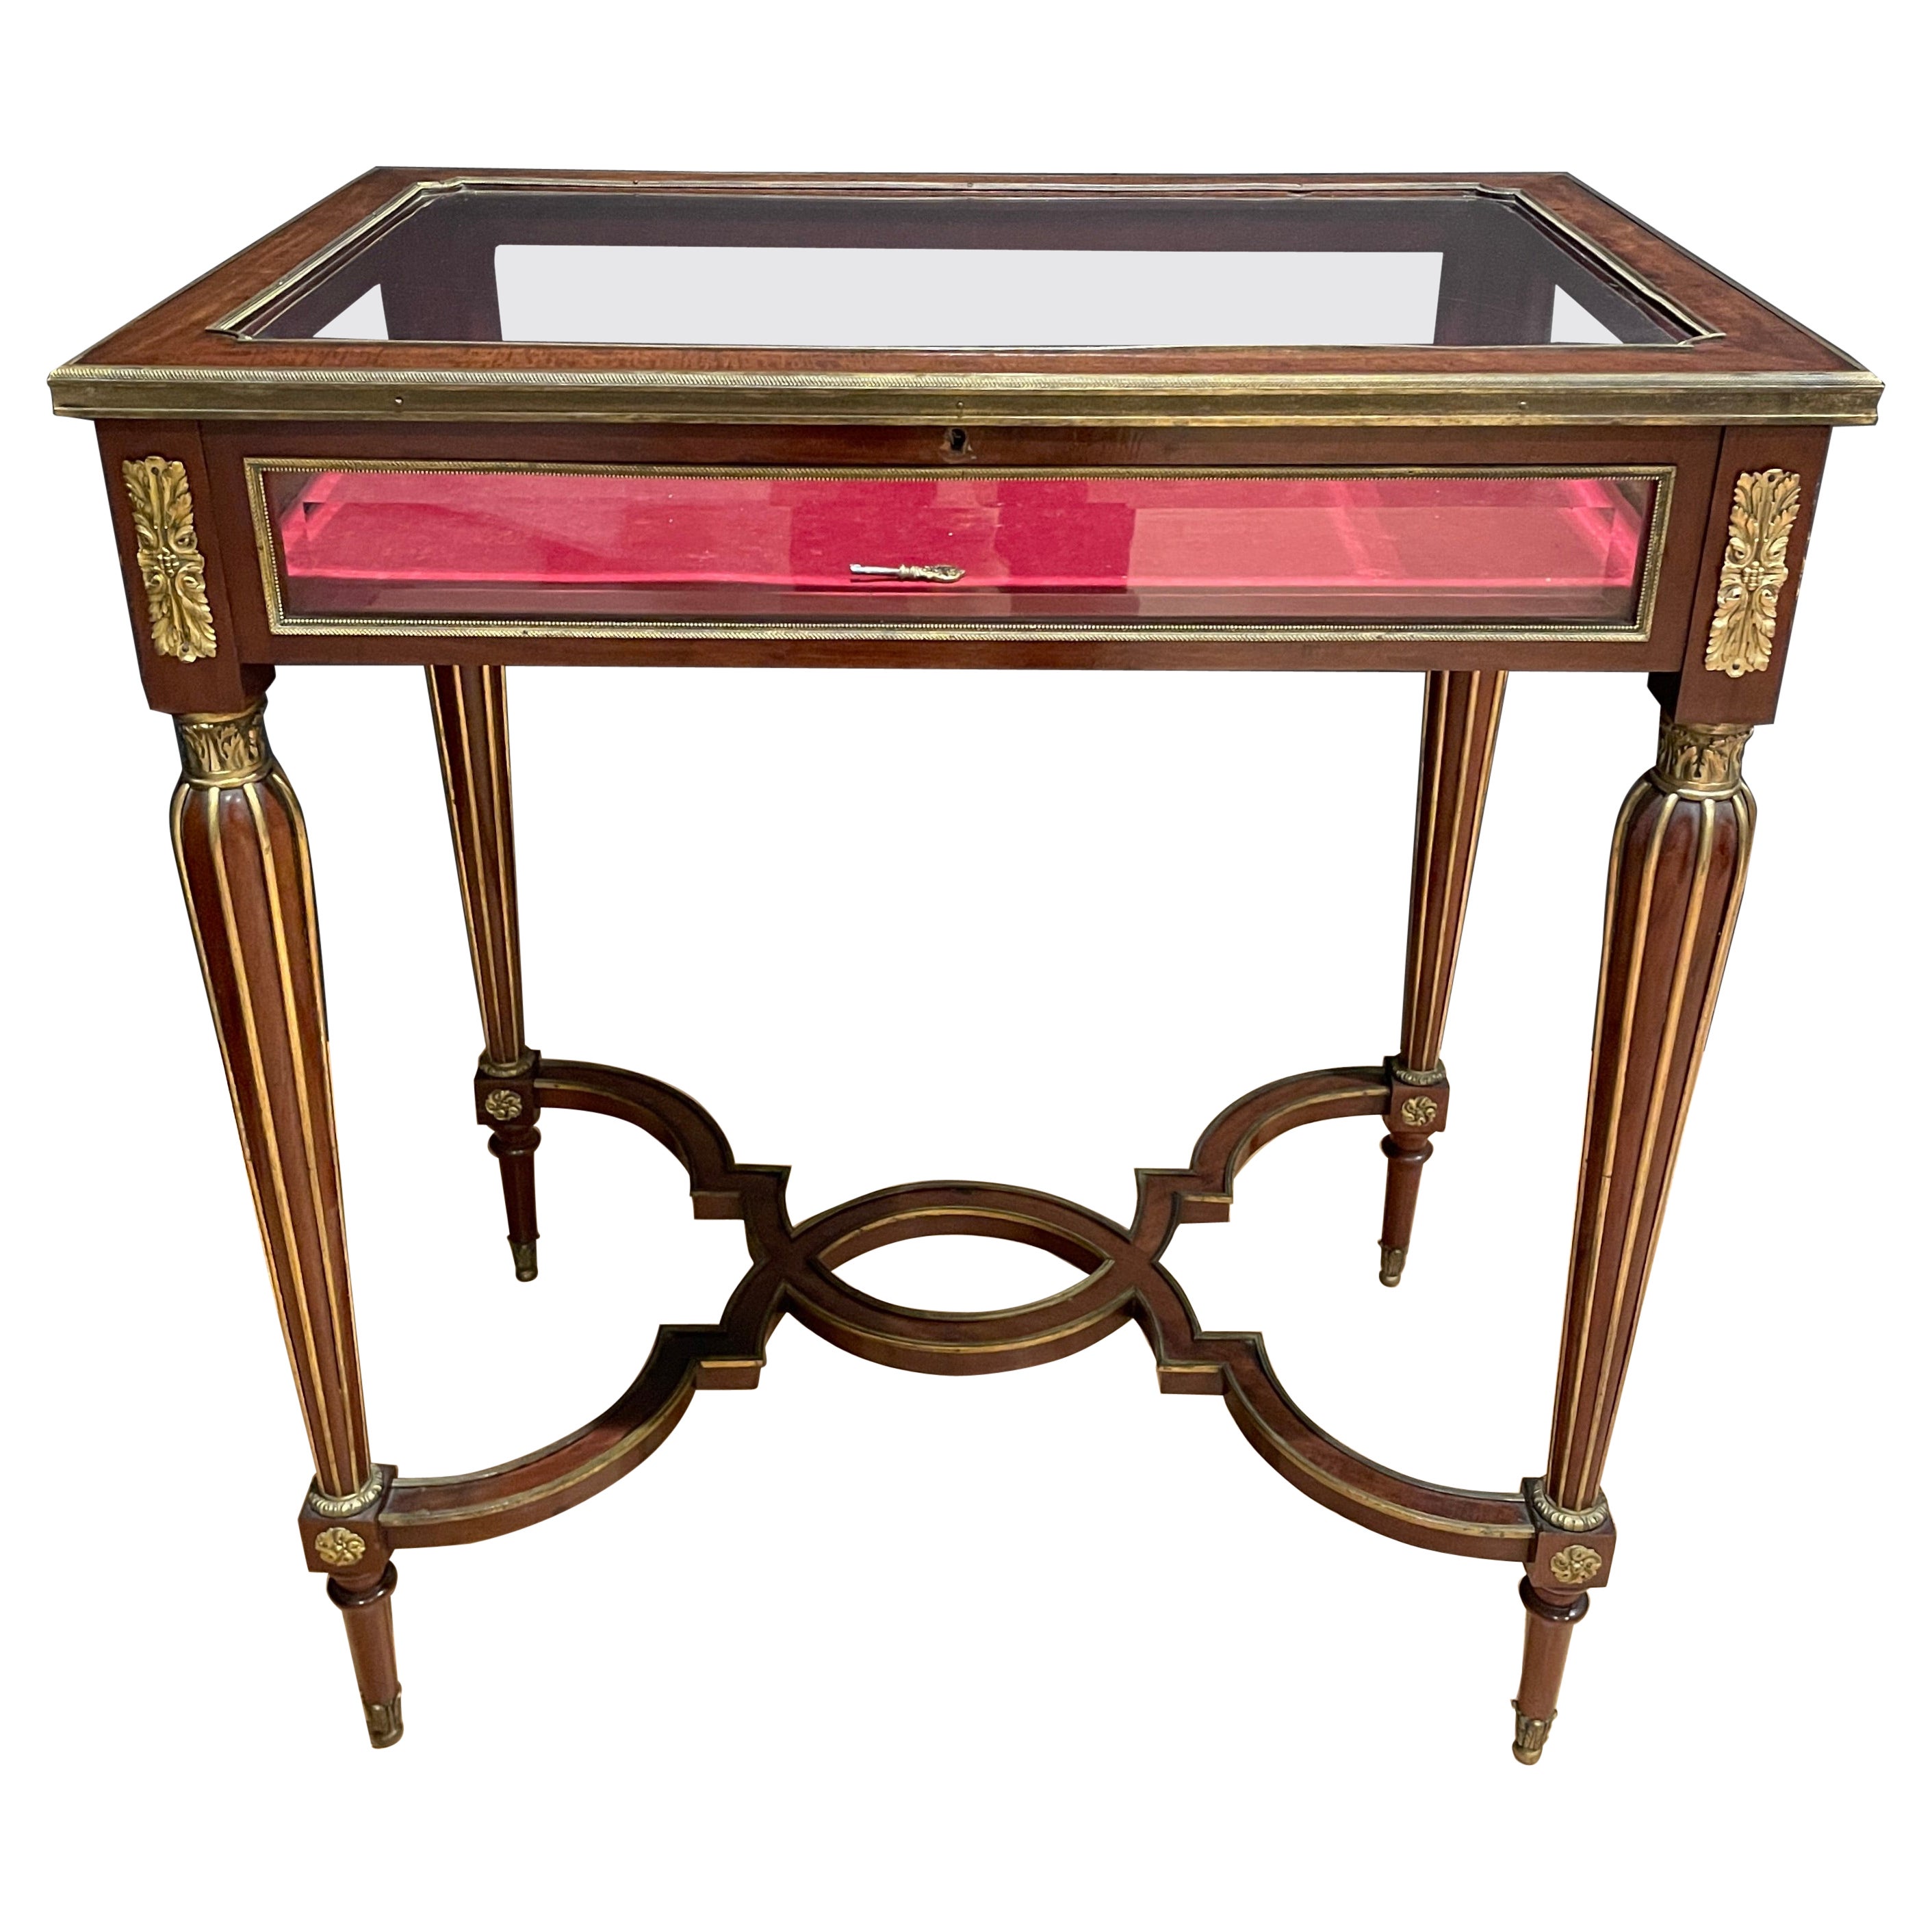 19th Century Louis XVI Gilt Bronze Mounted Vitrine Table by C. Mellier & Co. For Sale